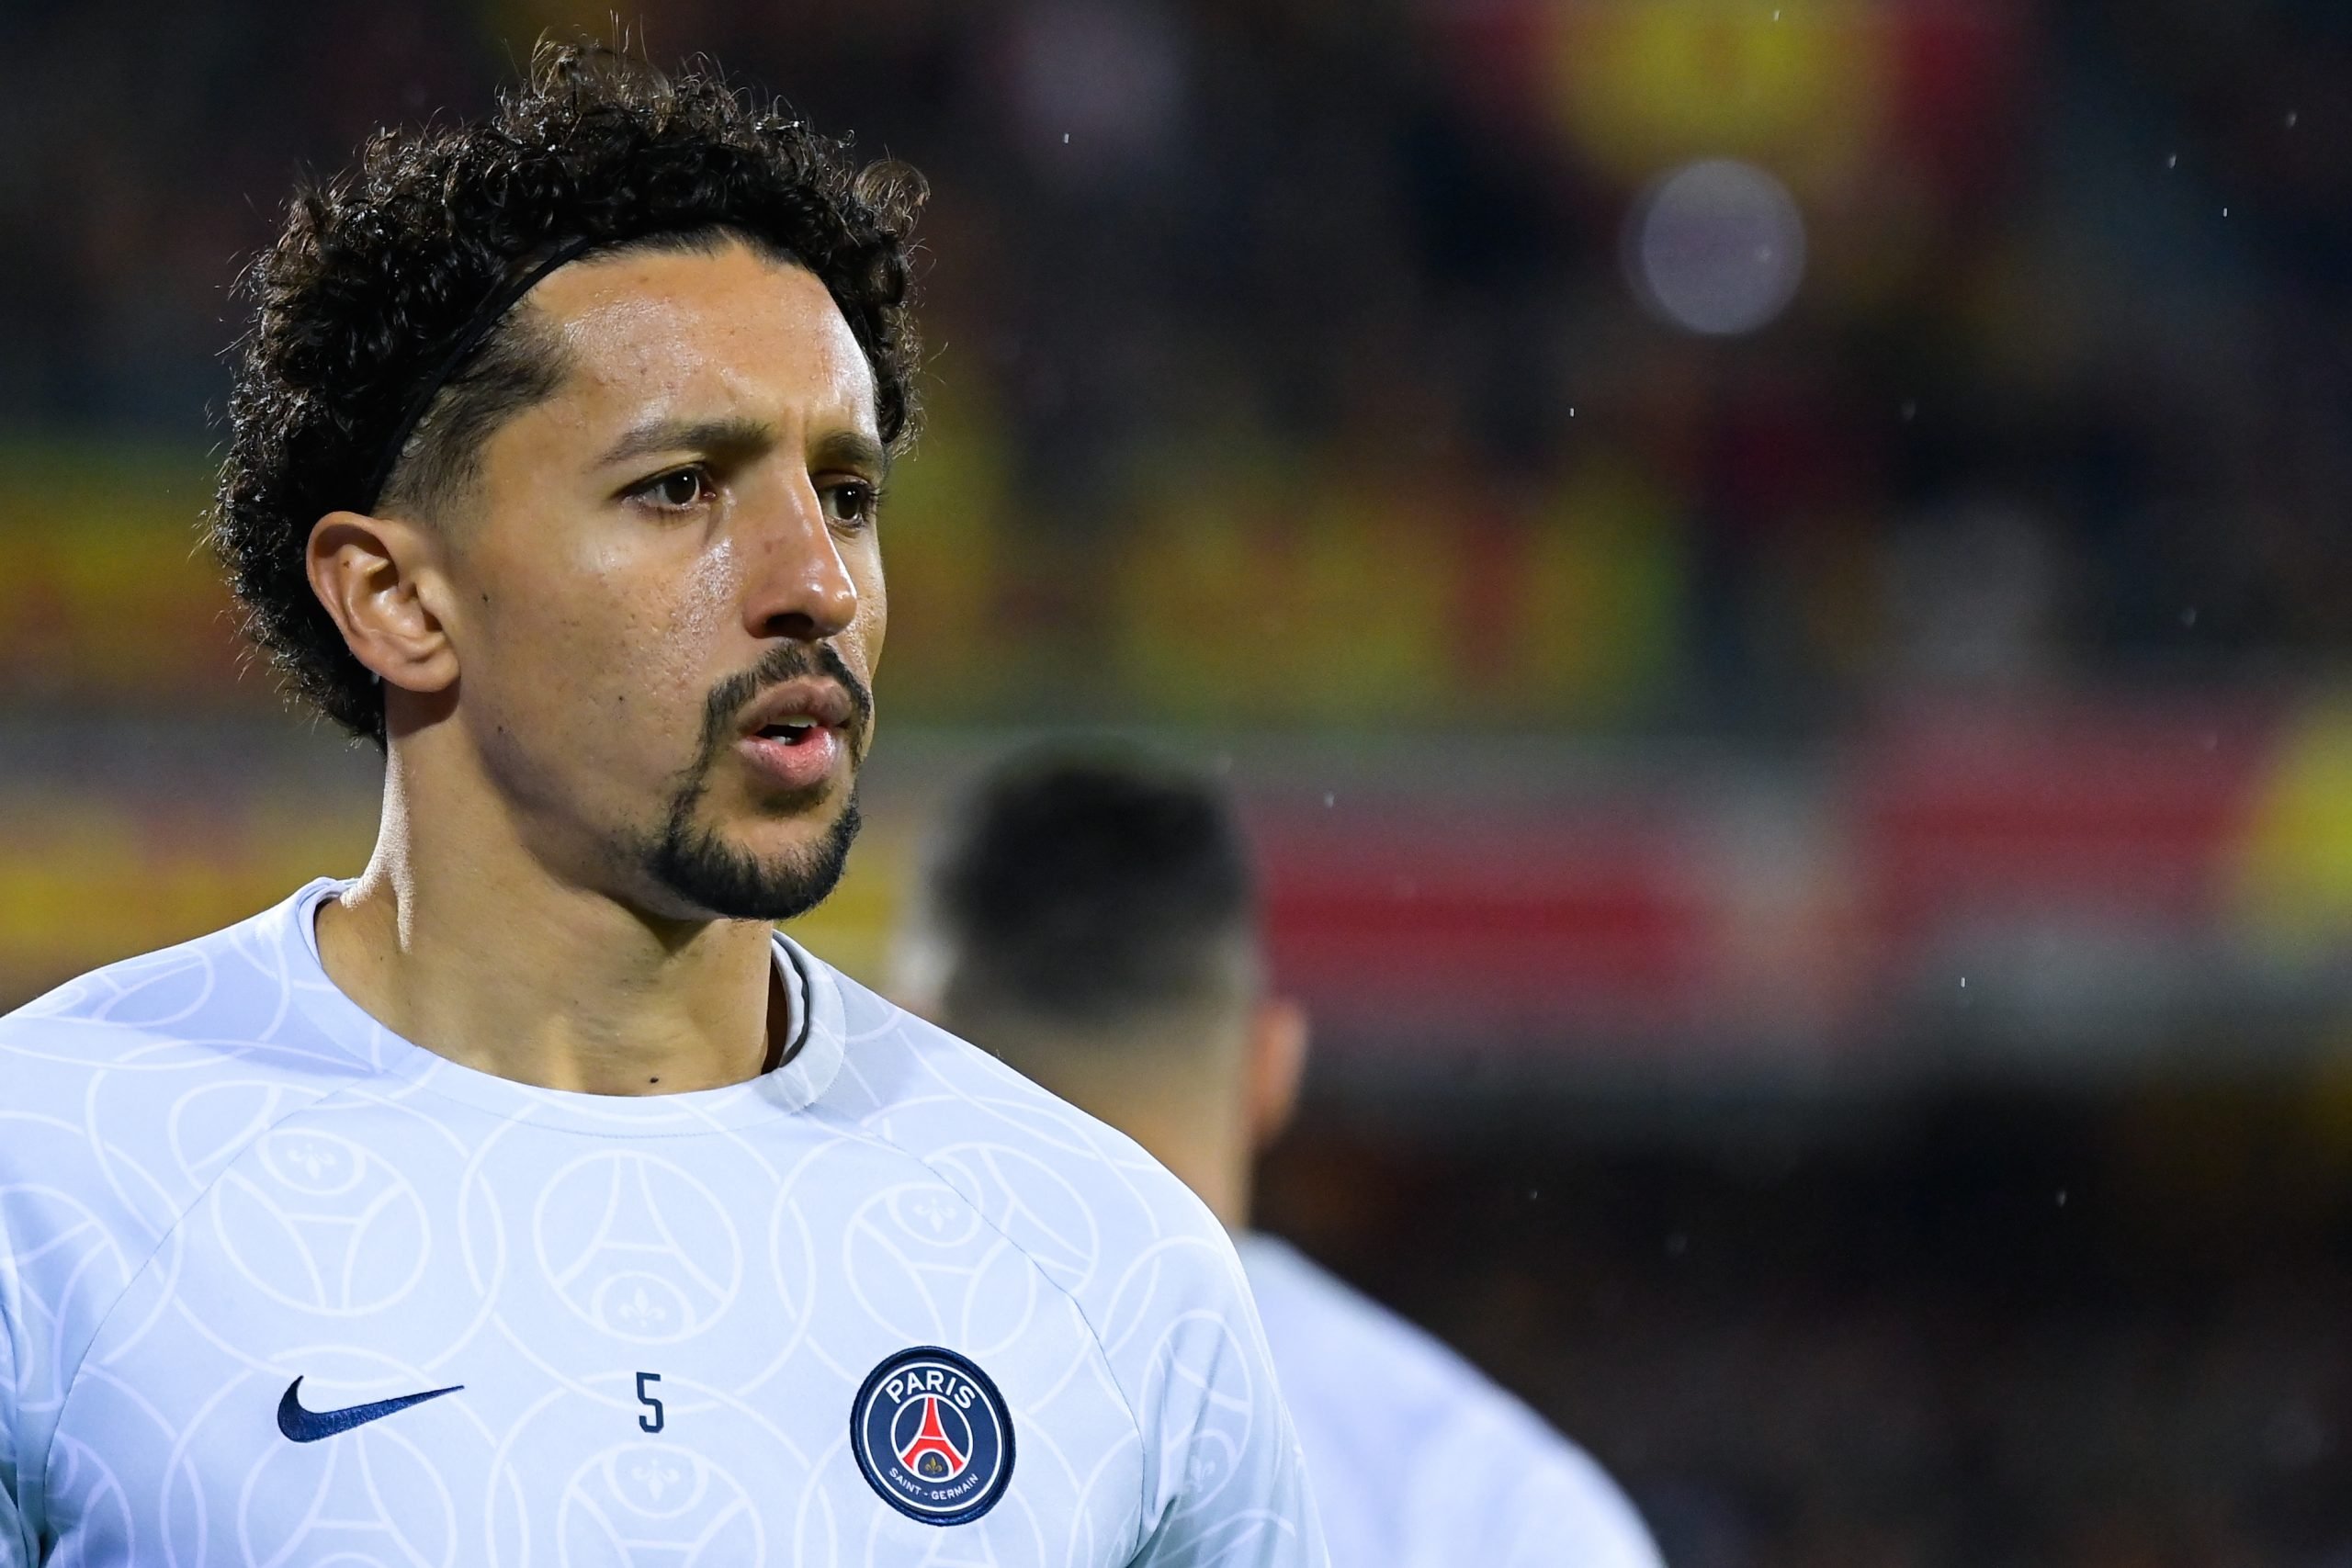 “He represents the loss of this PSG”, Marquinhos takes dearly